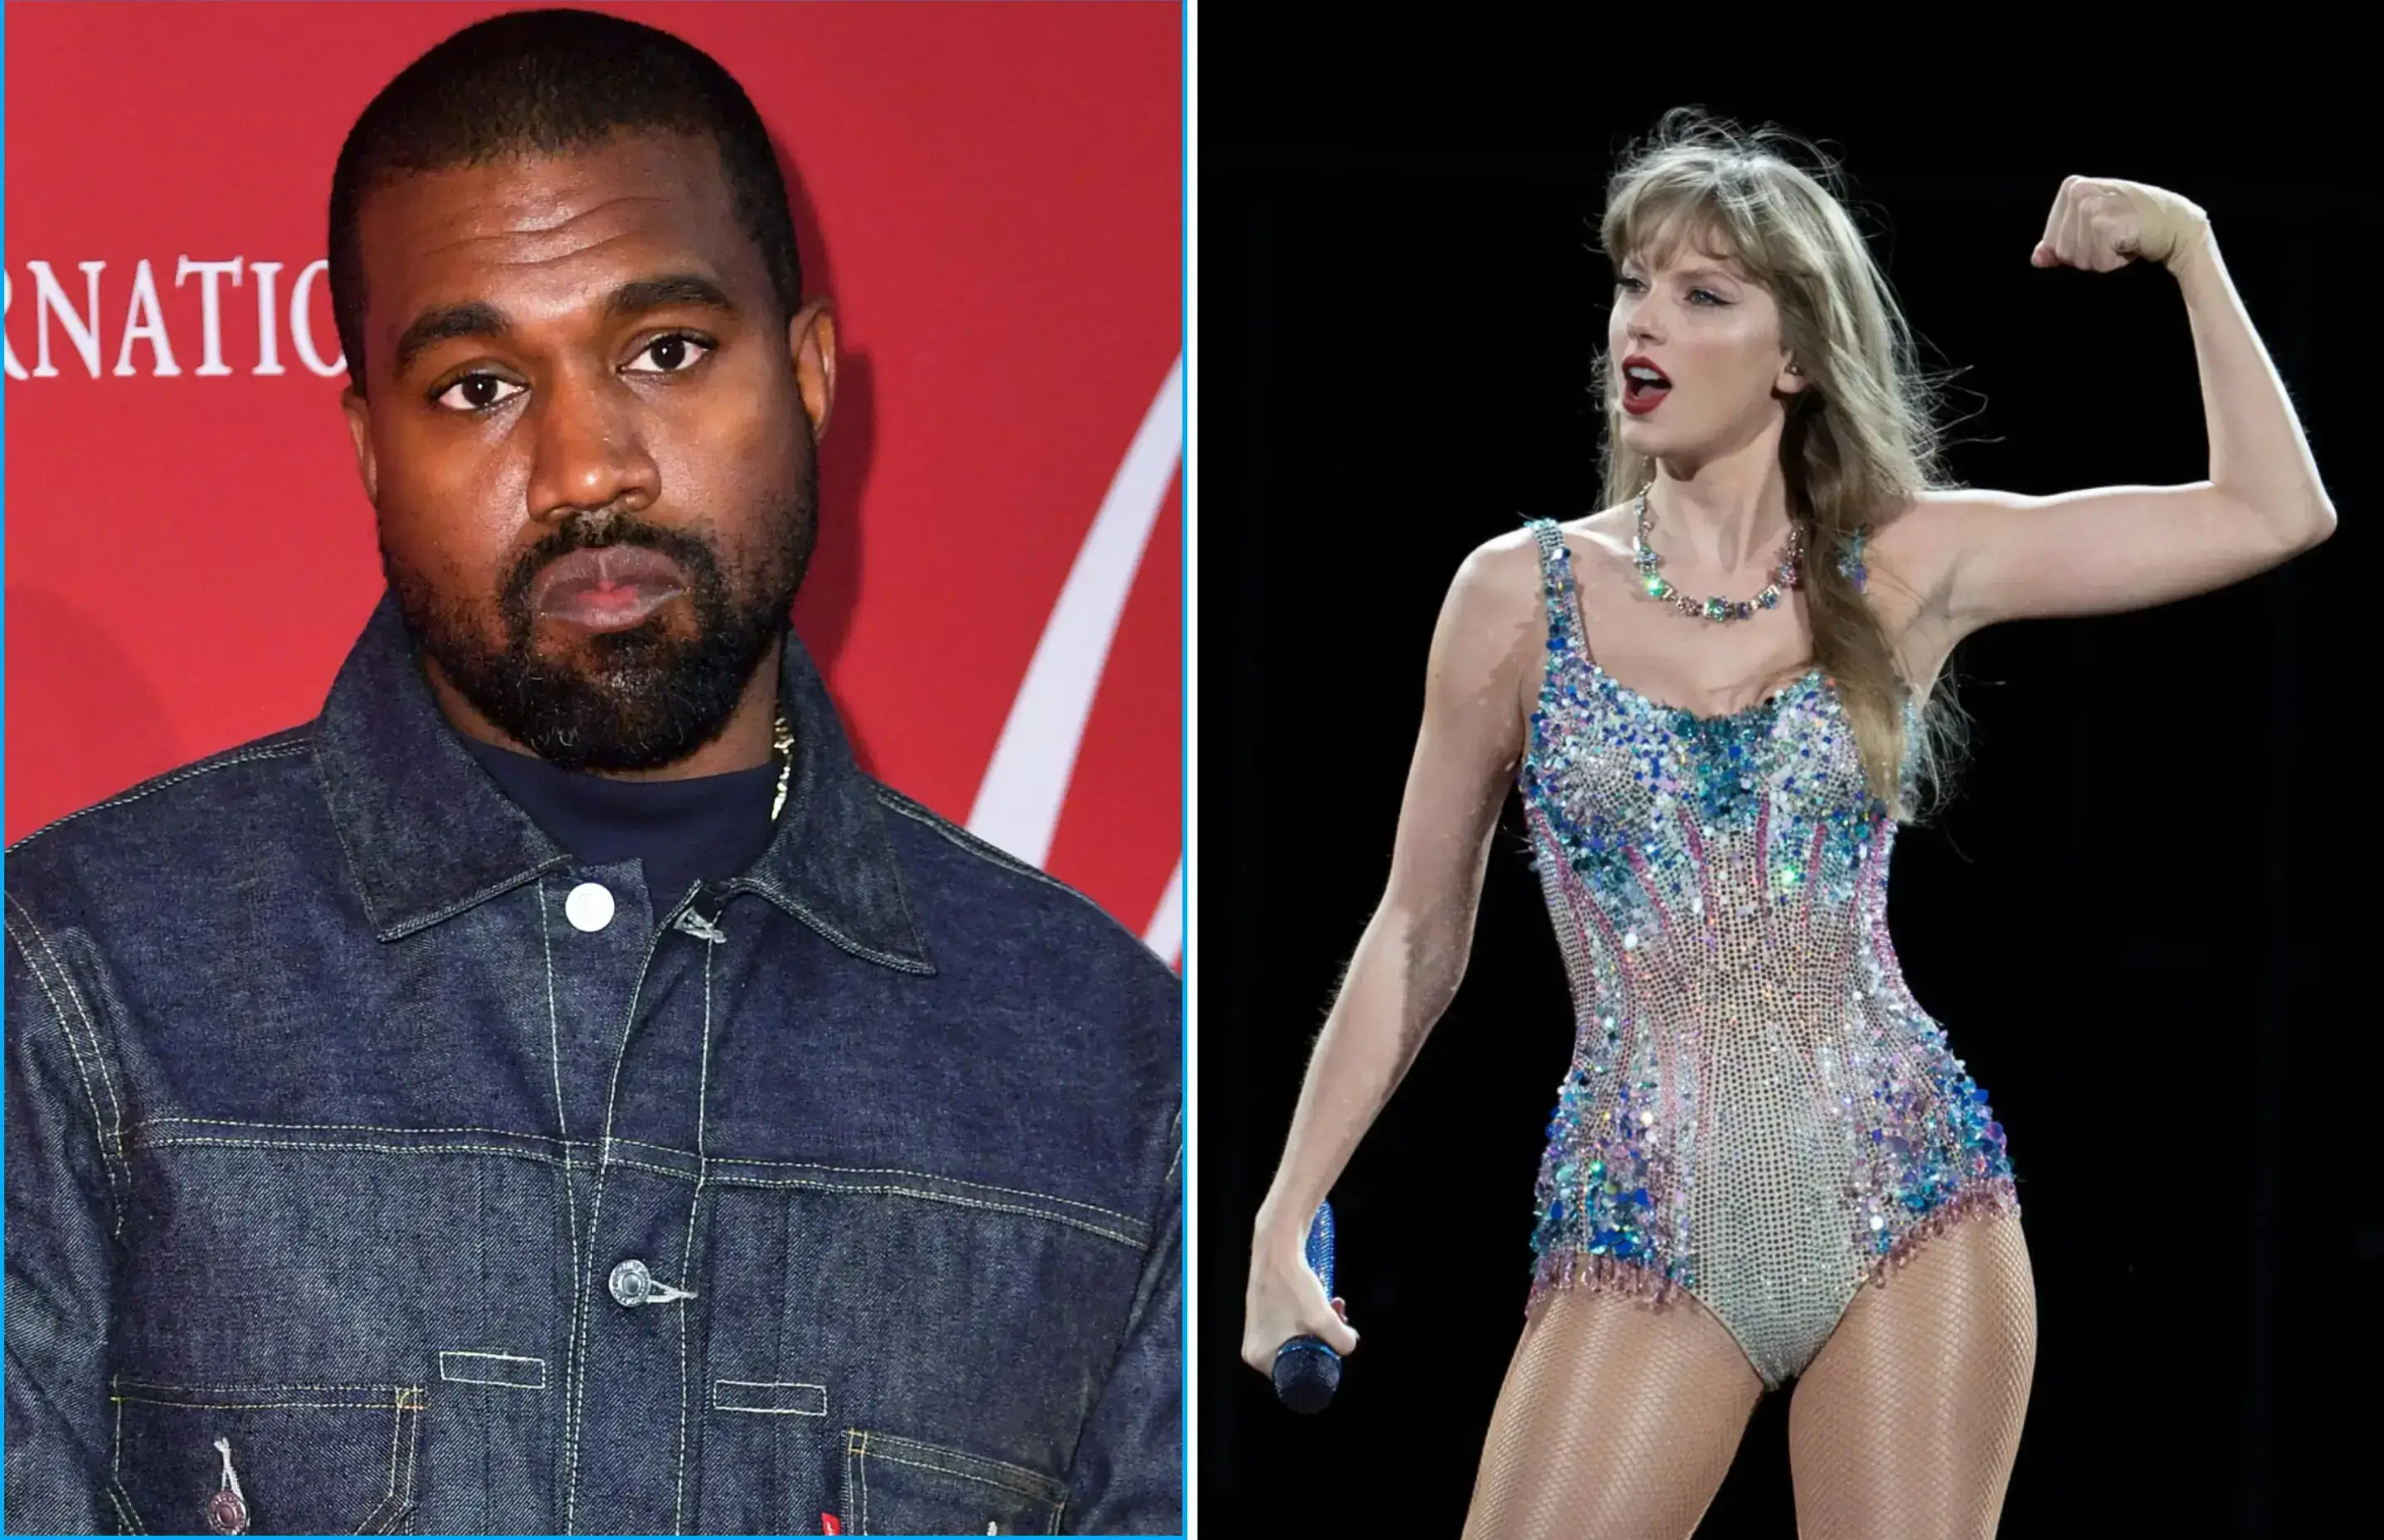 Kanye West vs. Taylor Swift: A Definitive Look at Their Ongoing Feud